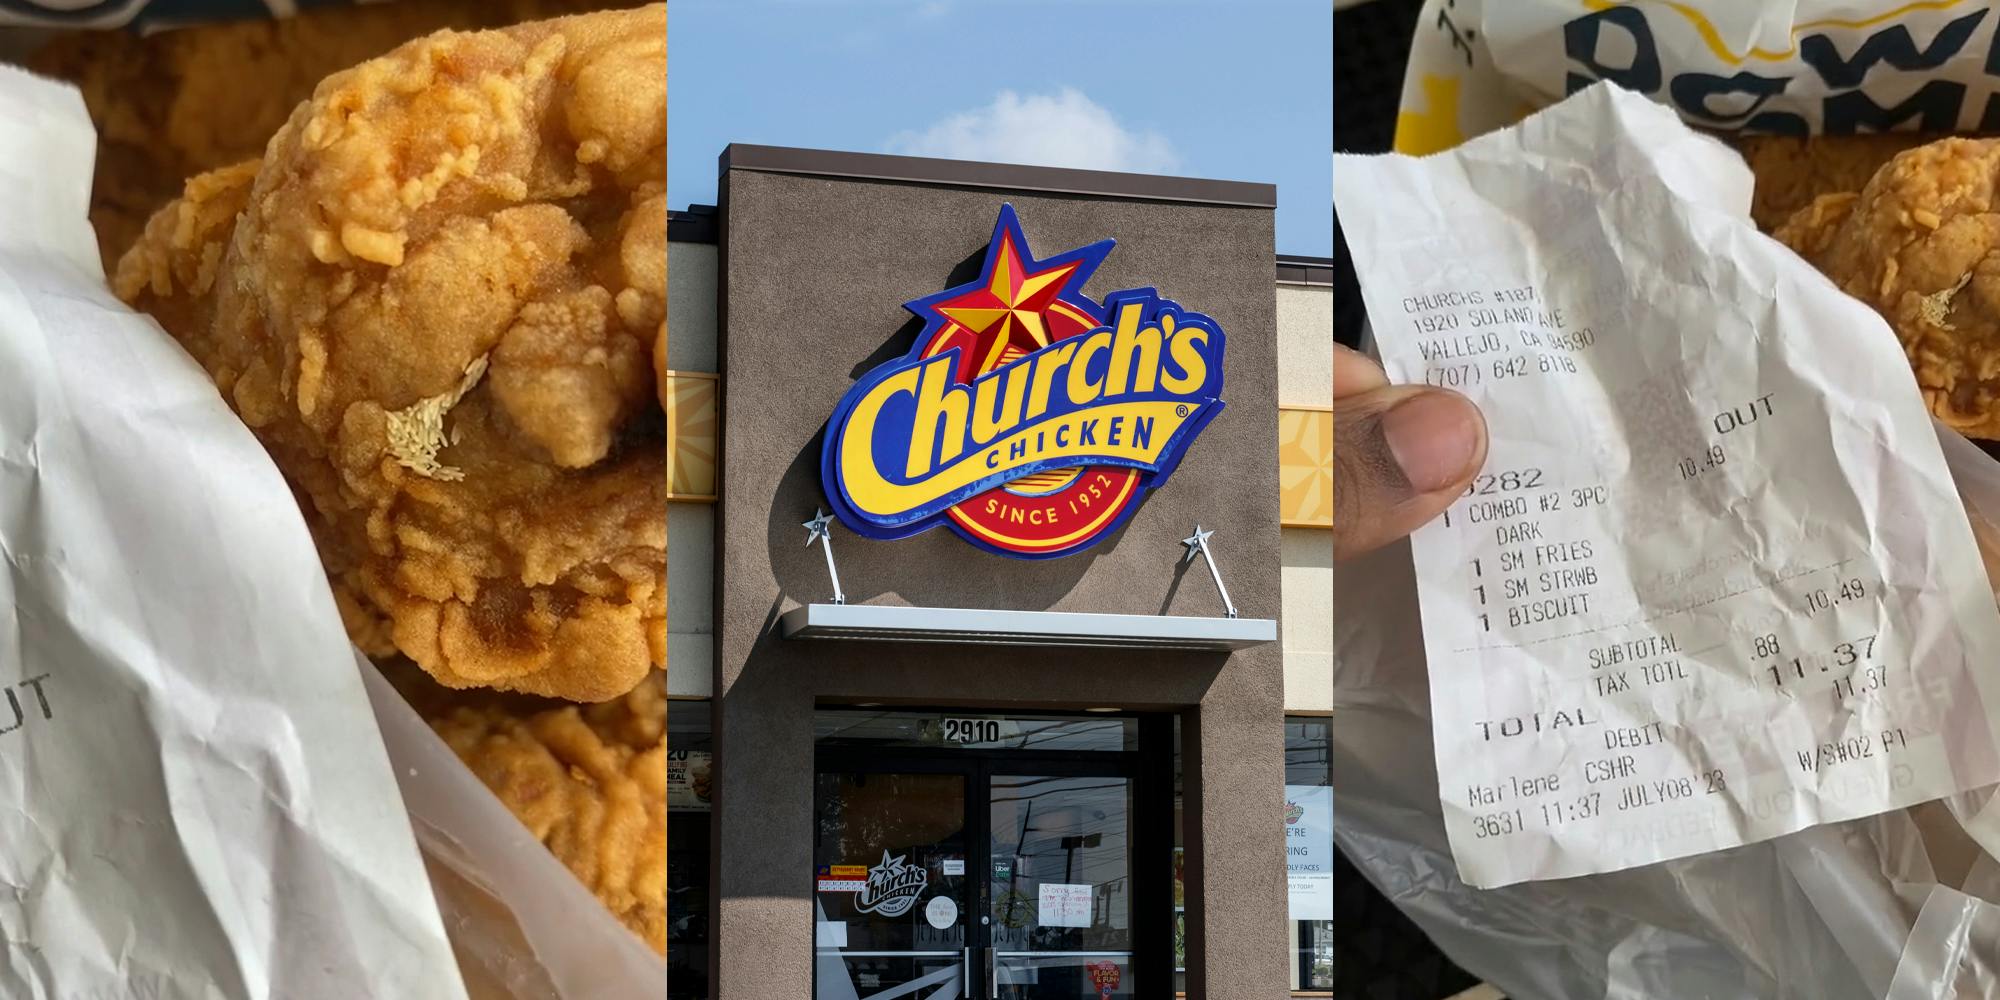 fly eggs on fried chicken (l) Church's Chicken building with sign (c) Church's chicken receipt in hand next to chicken with fly eggs on it (r)